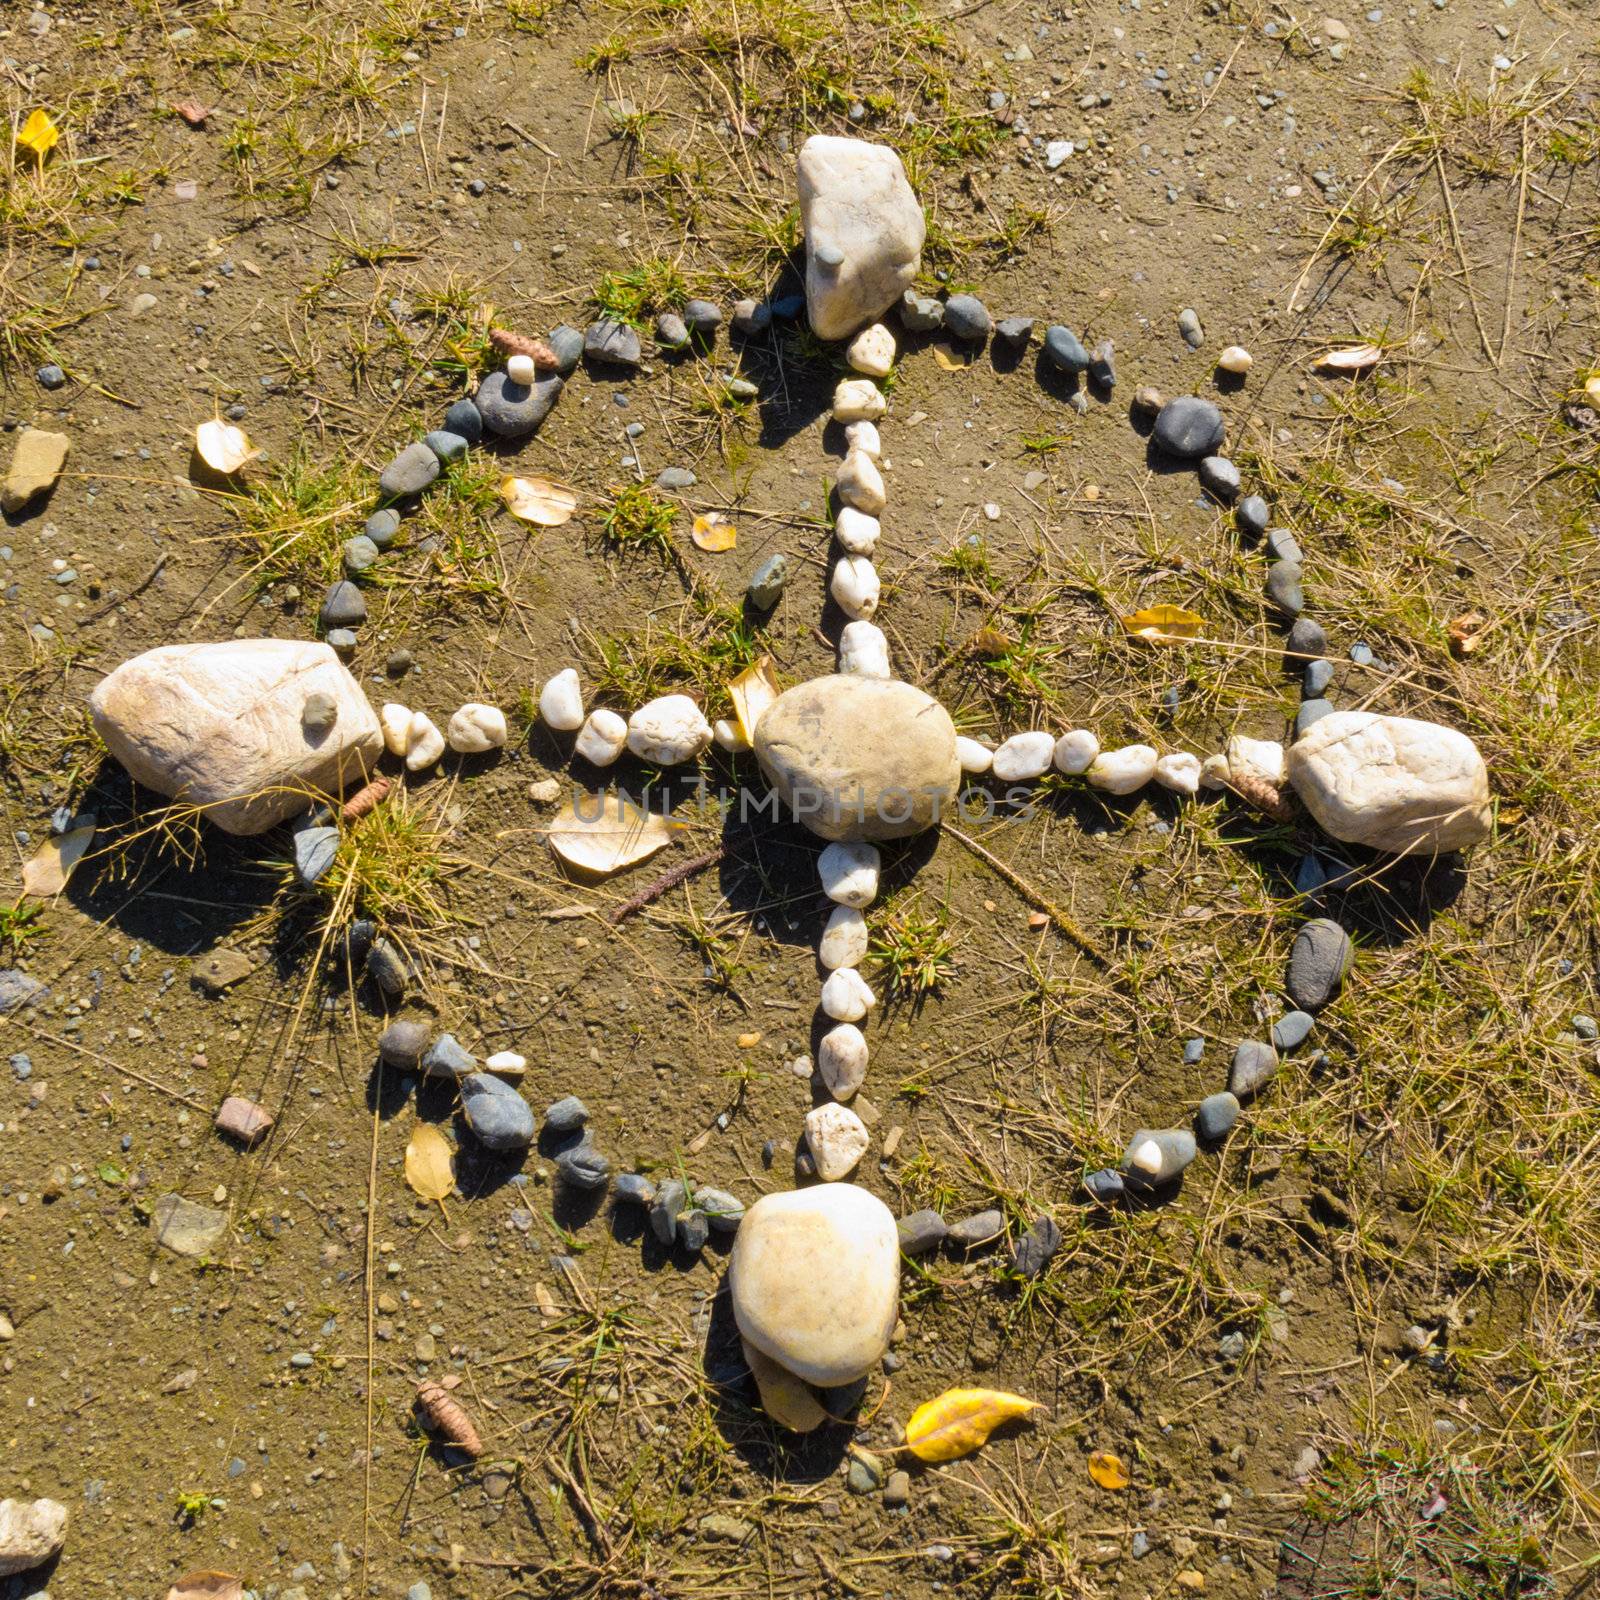 Native American Medicine Wheel or Sacred Hoop formed from stones on the ground.